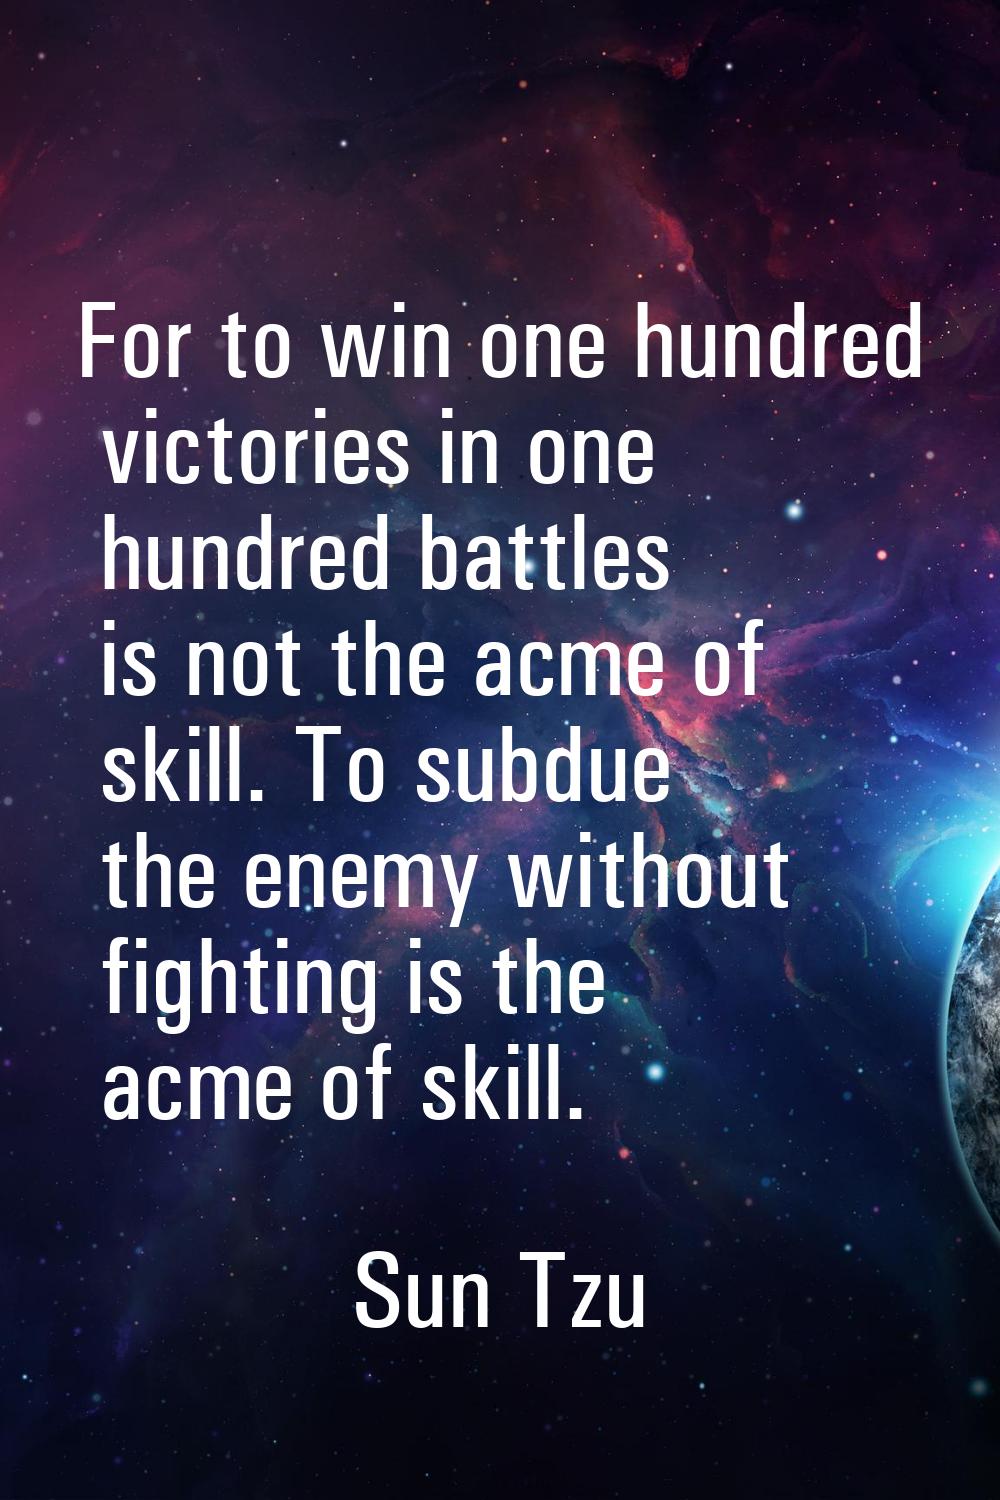 For to win one hundred victories in one hundred battles is not the acme of skill. To subdue the ene